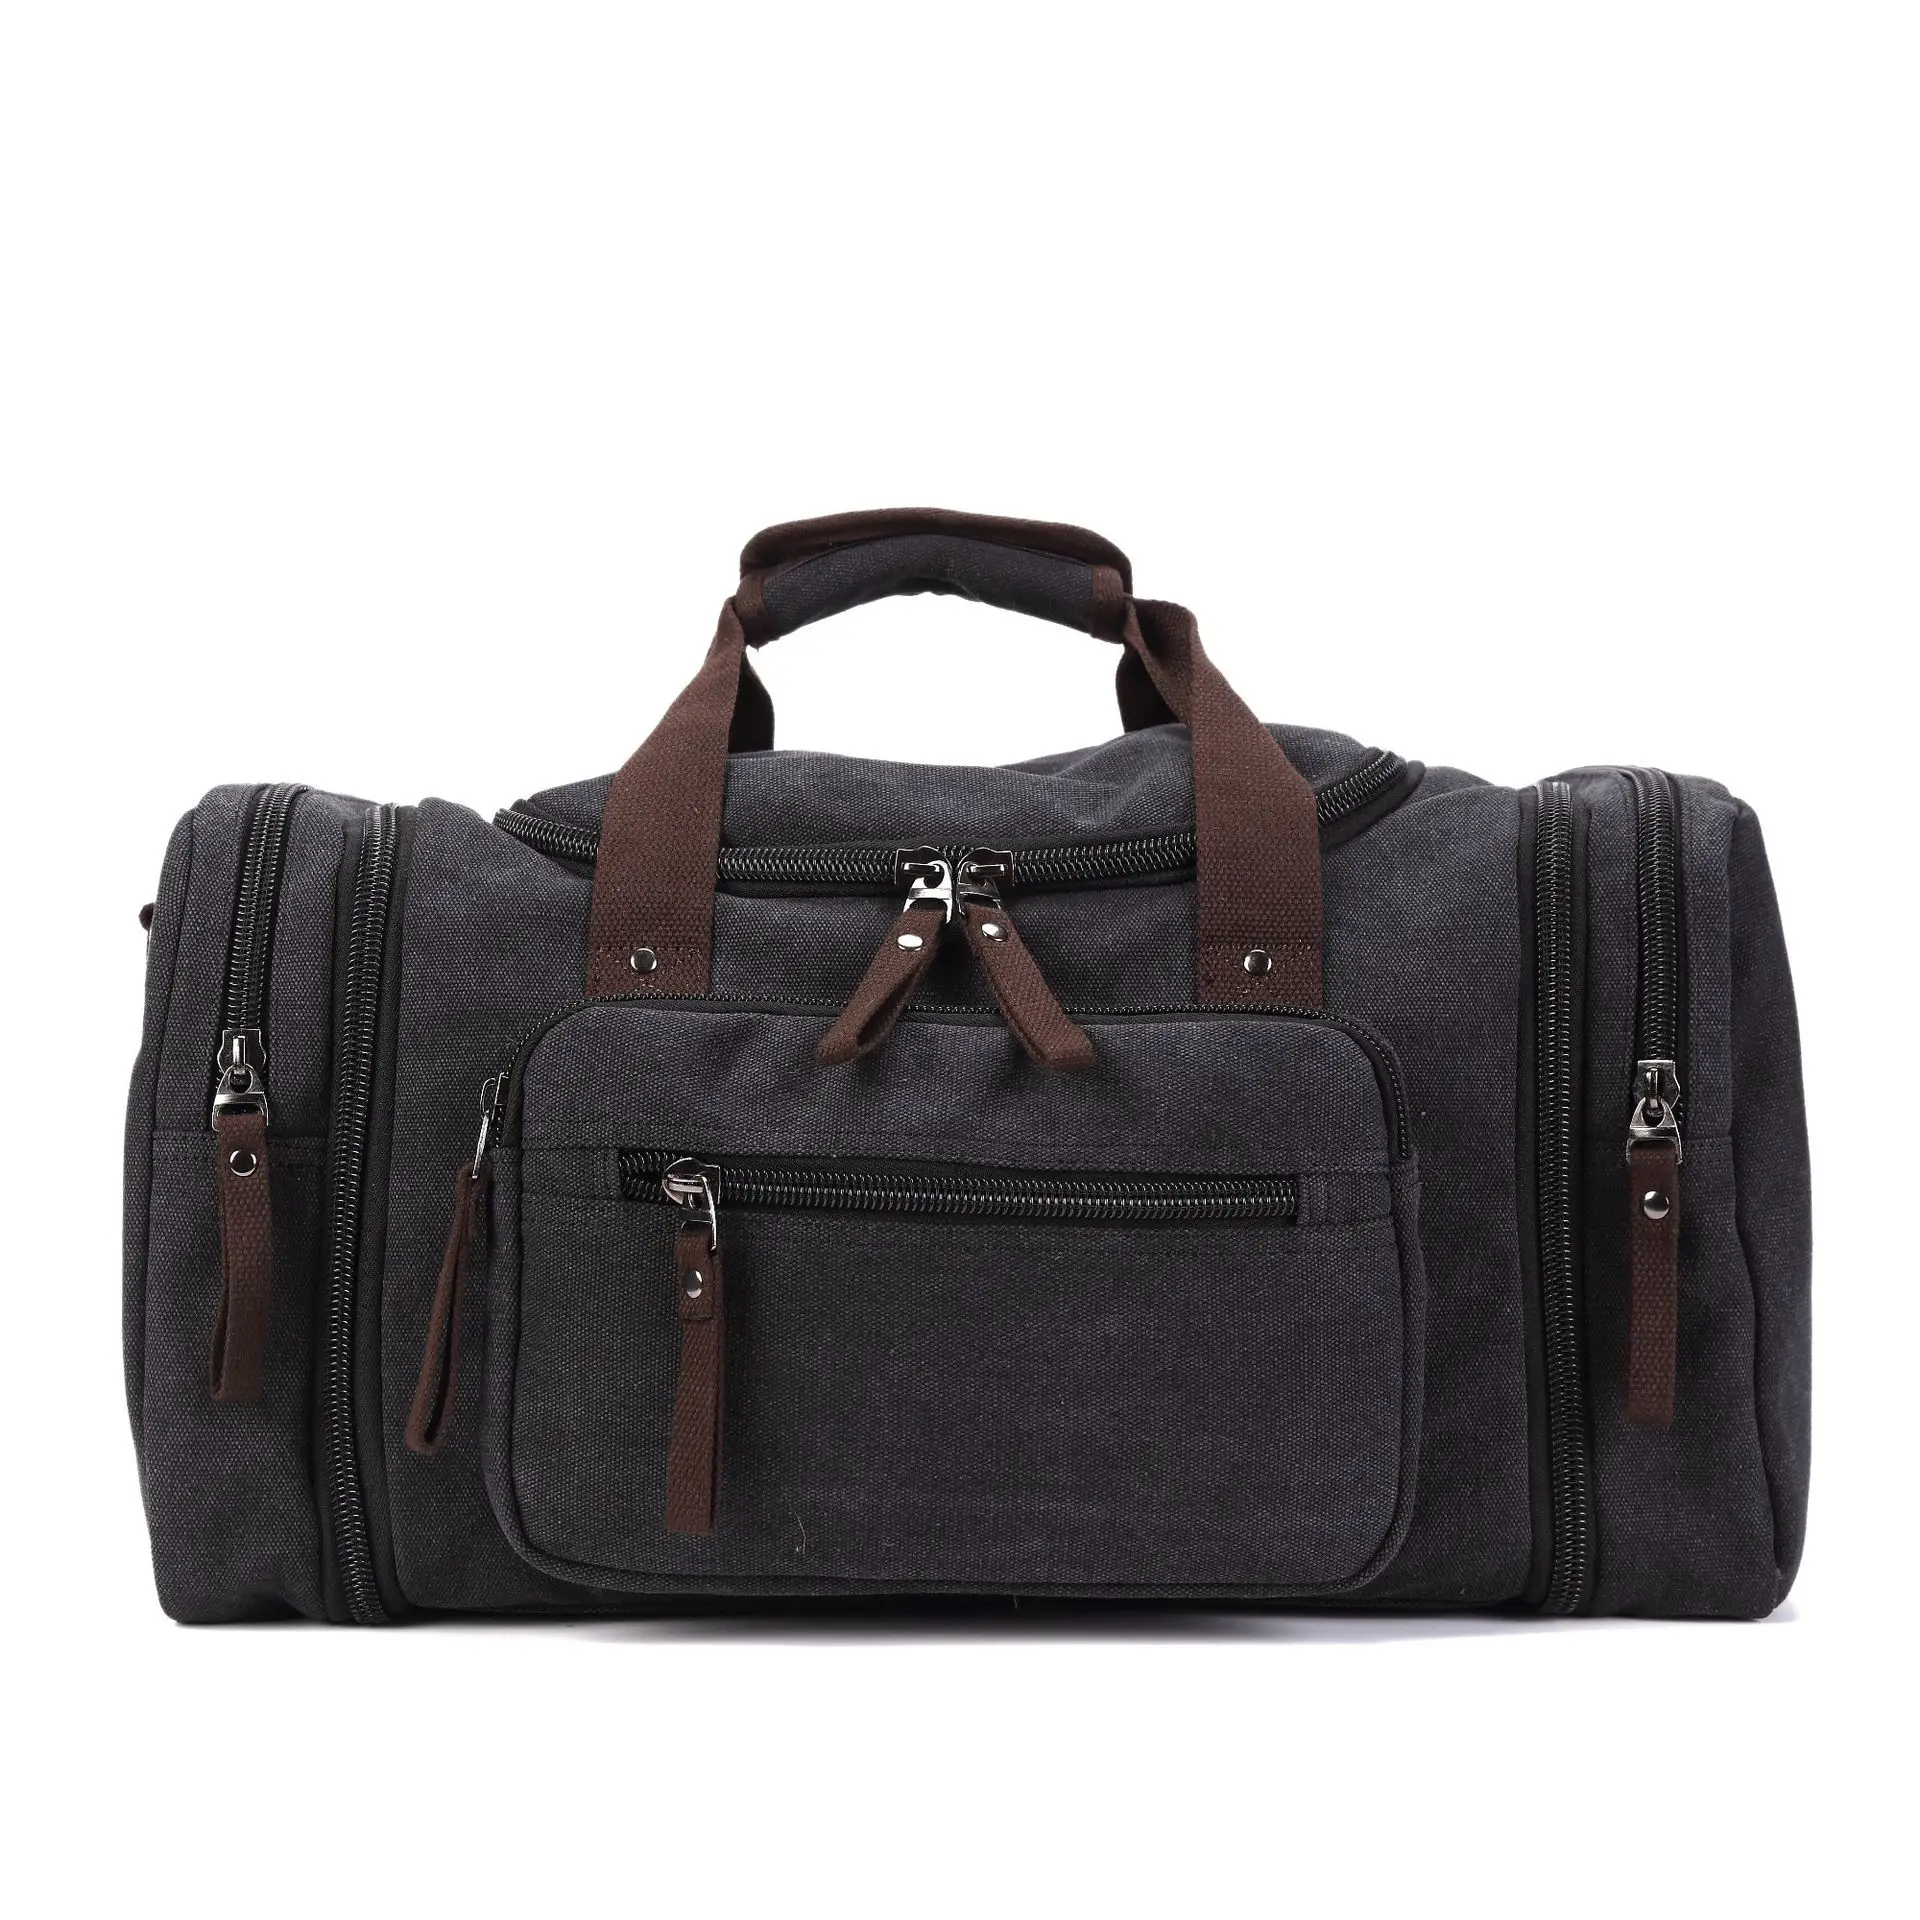 Men Duffel Bags Canvas Leather Men Travel Bags Carry on Luggage Bags Handbag Travel Tote Large Weekend Bag Overnight